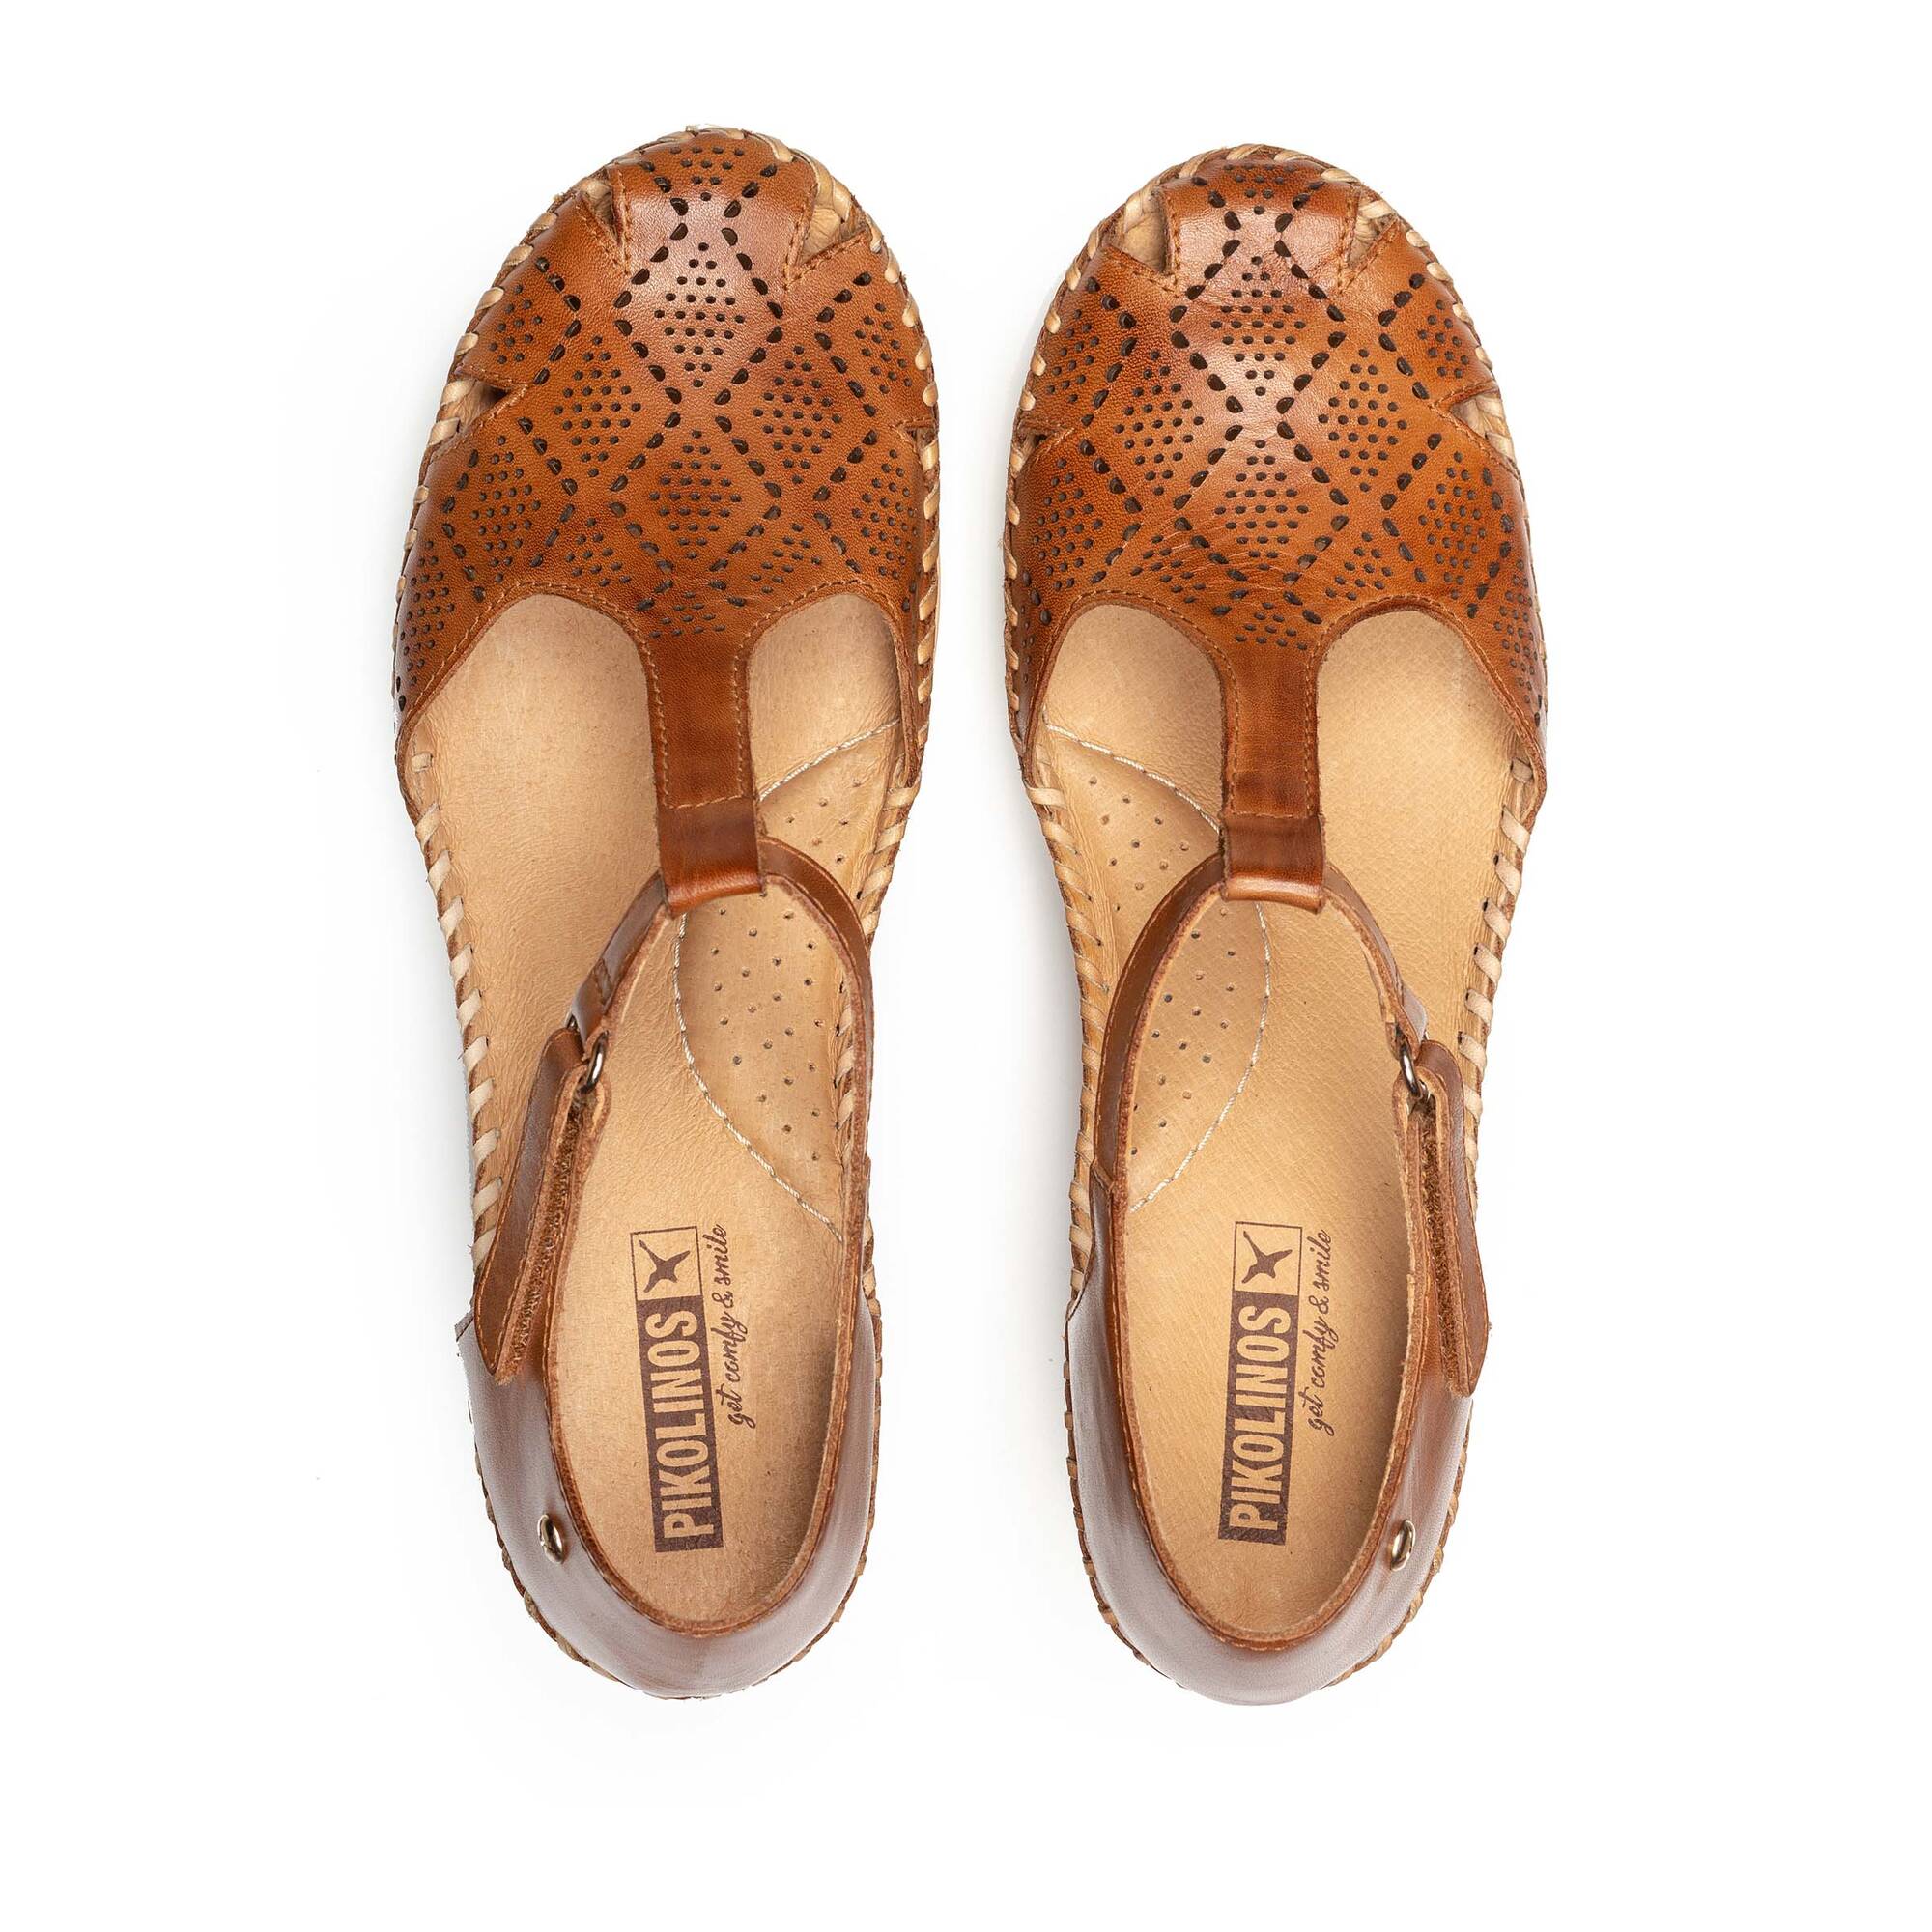 Wedges and platforms | AGUADULCE W3Z-1991, BRANDY, large image number 100 | null